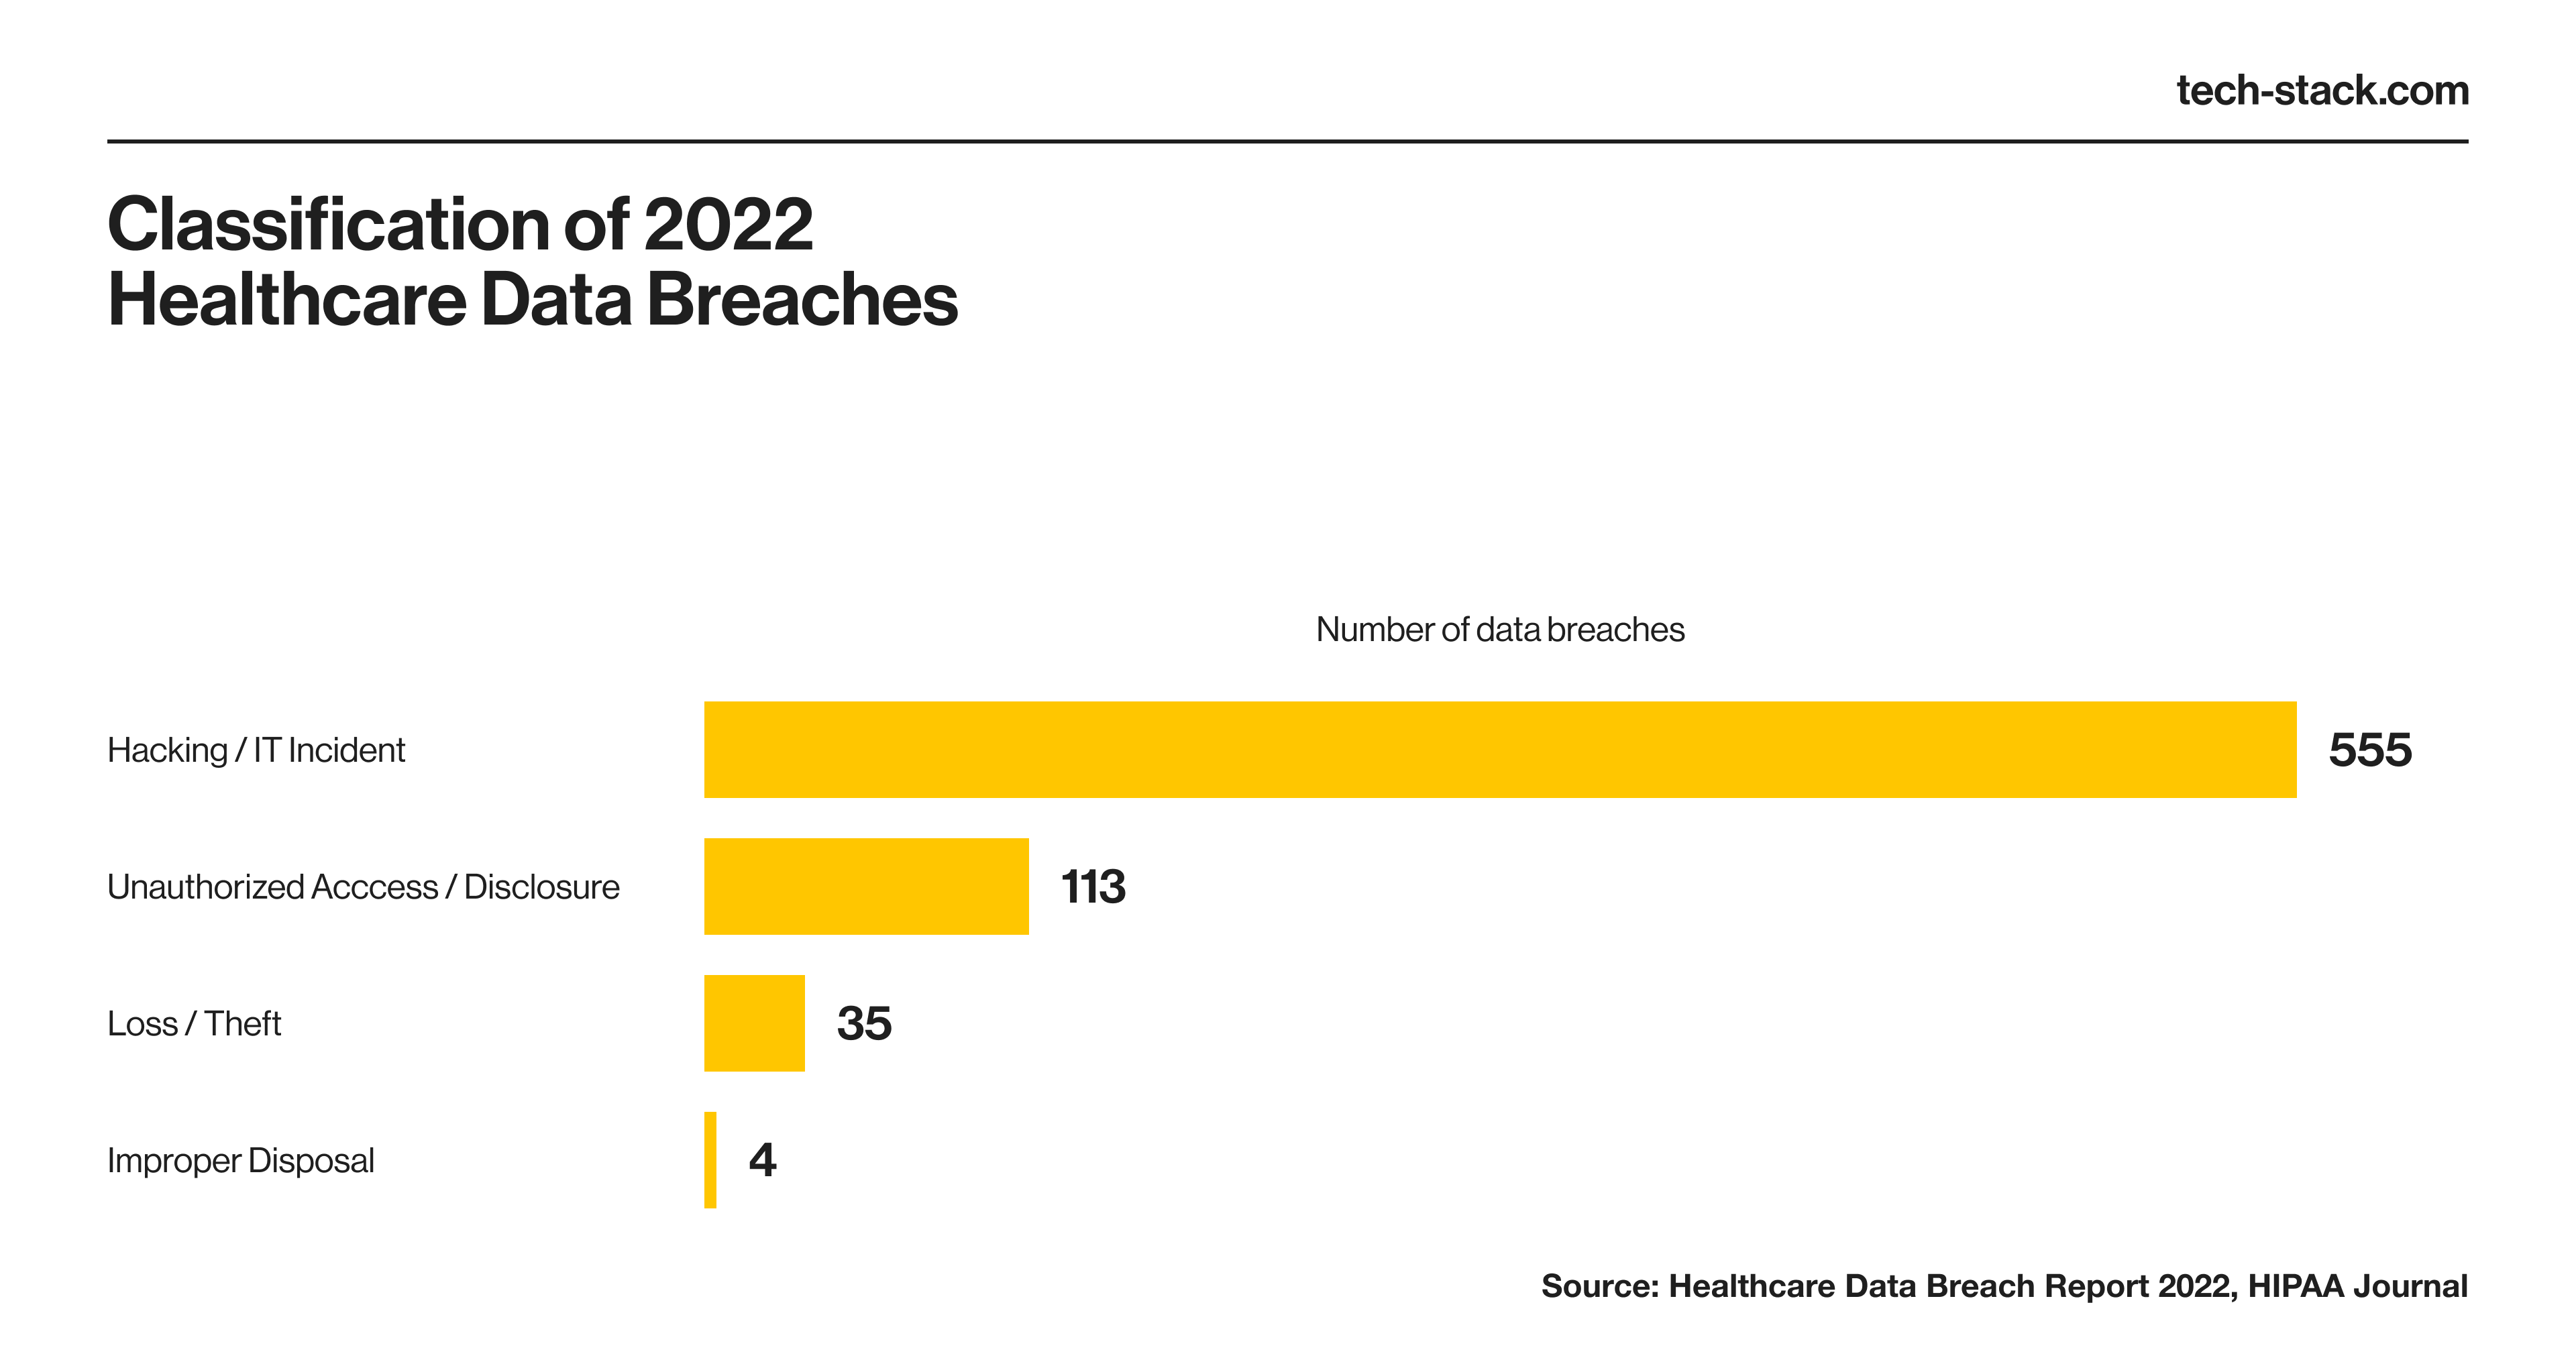 Sources of healthcare data breaches via sources like IoT devices